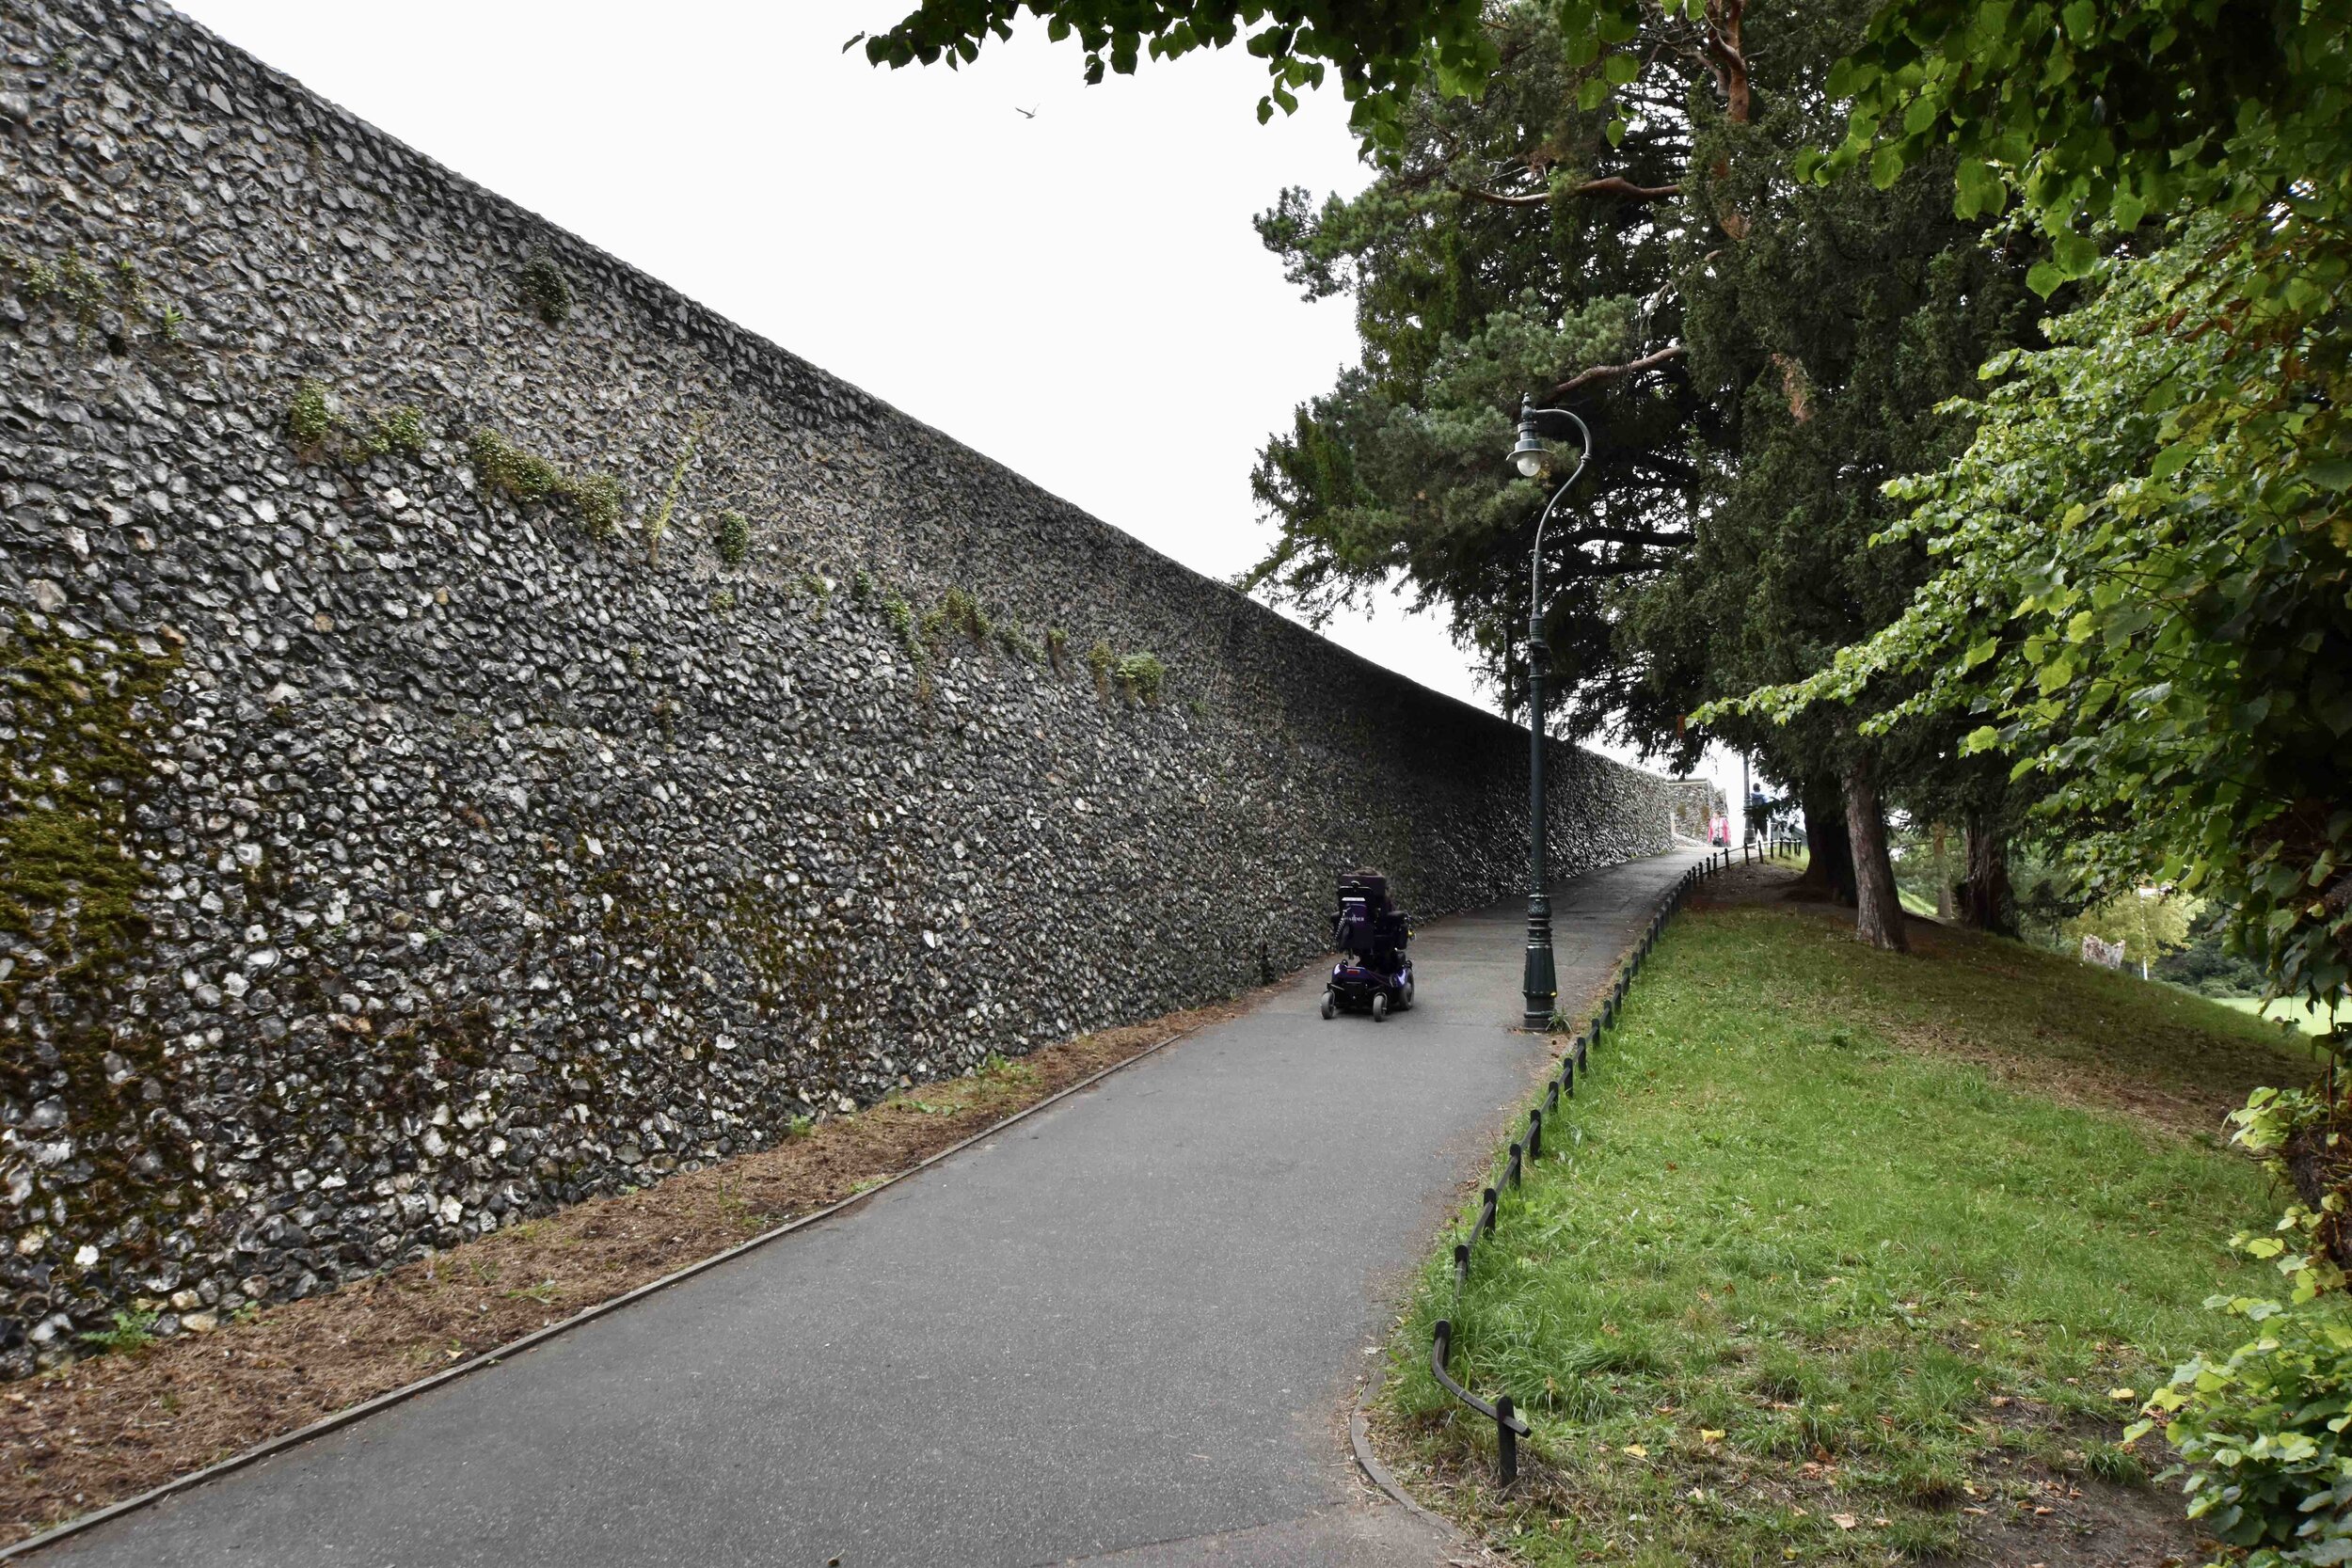 A wheelchair user heading up to the old city wall in Canterbury